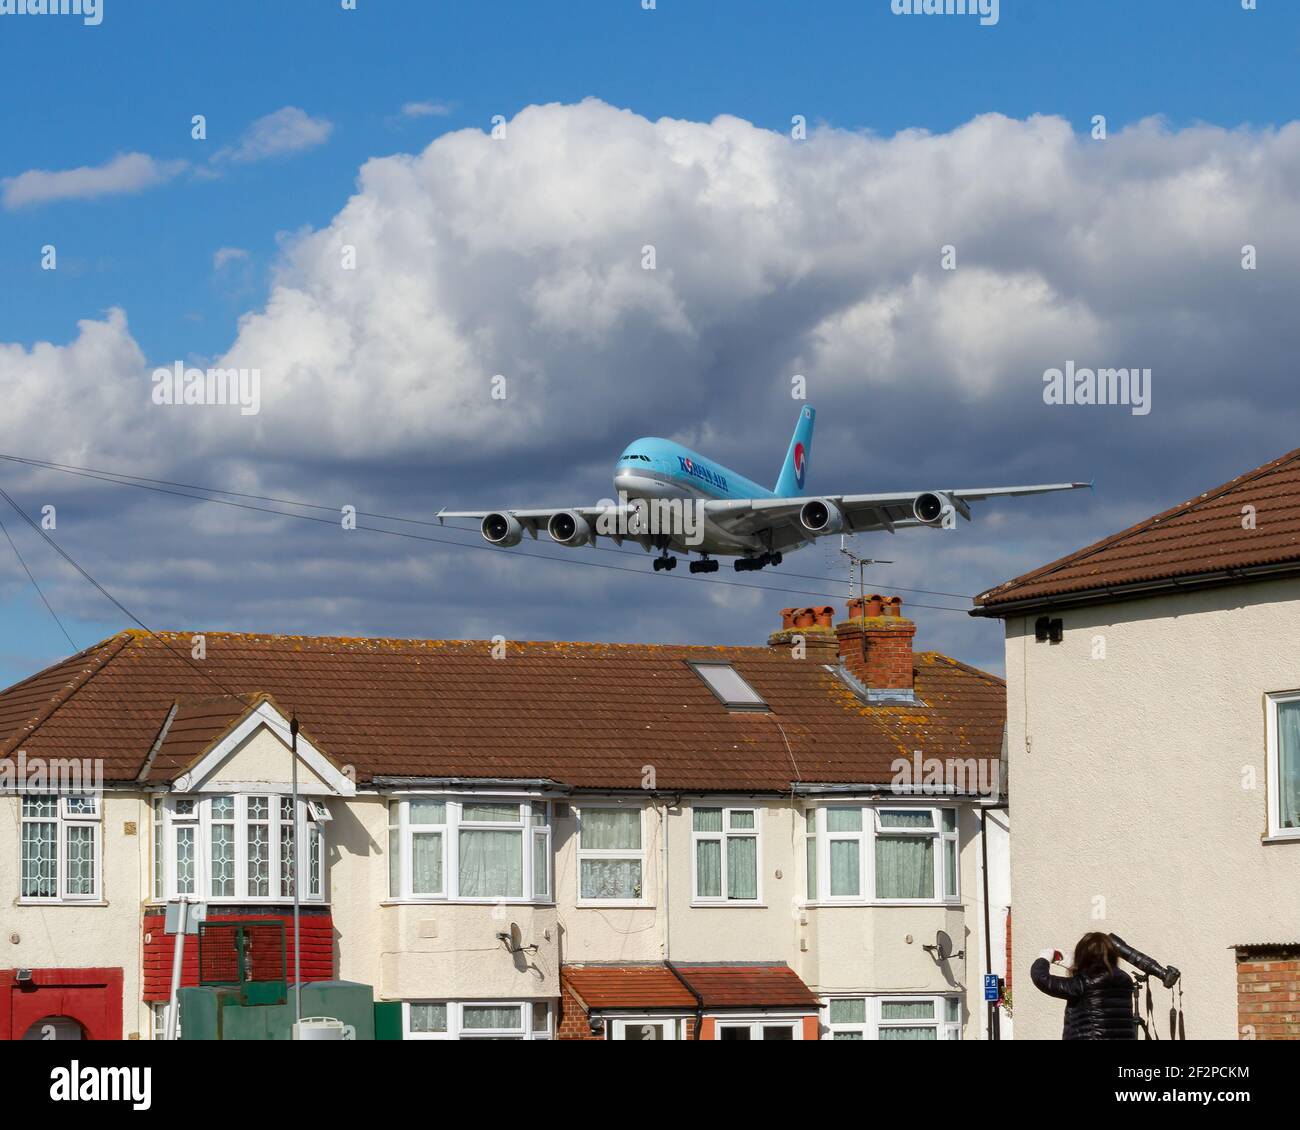 London, Heathrow Airport - August 2017: Korean Airlines, Airbus A380 on final approach flying over residential homes. image Abdul Quraishi Stock Photo